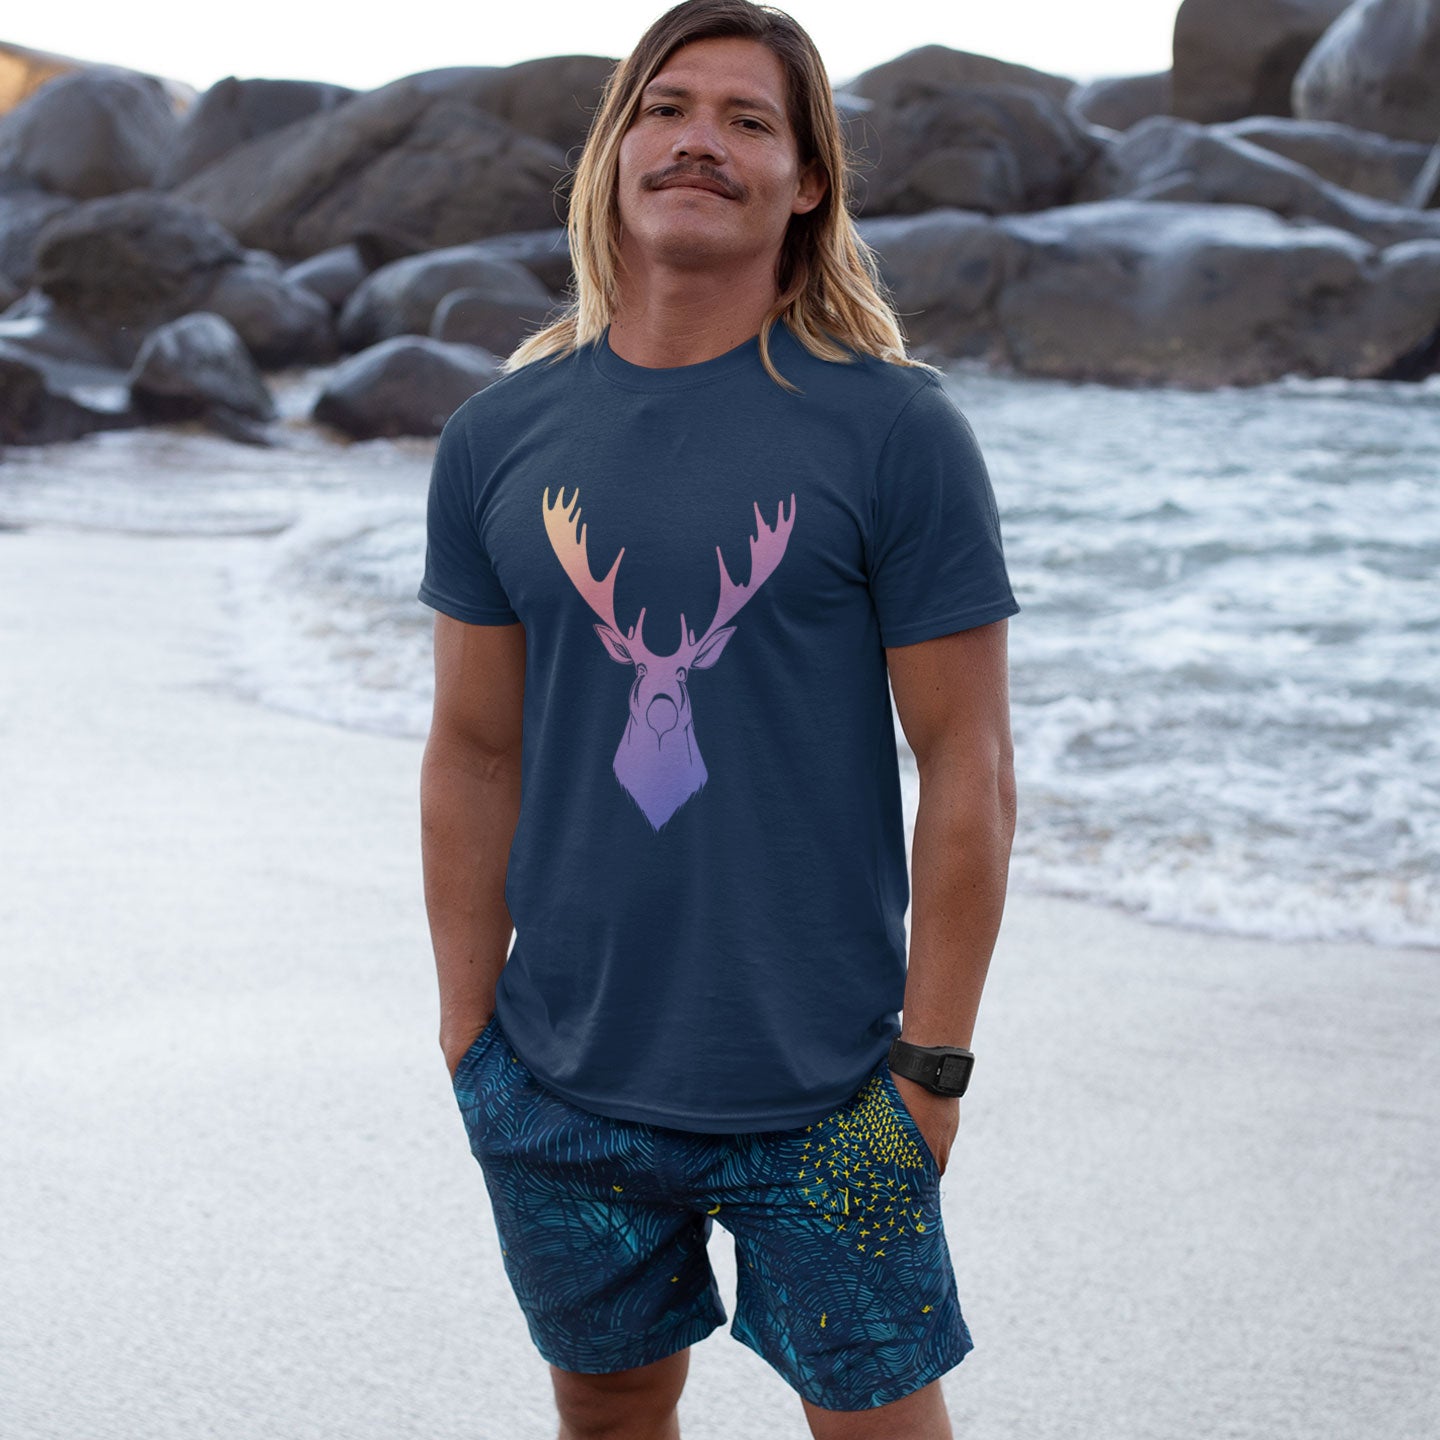 guy on the beach wearing a navy blue t-shirt with a rainbow moose print